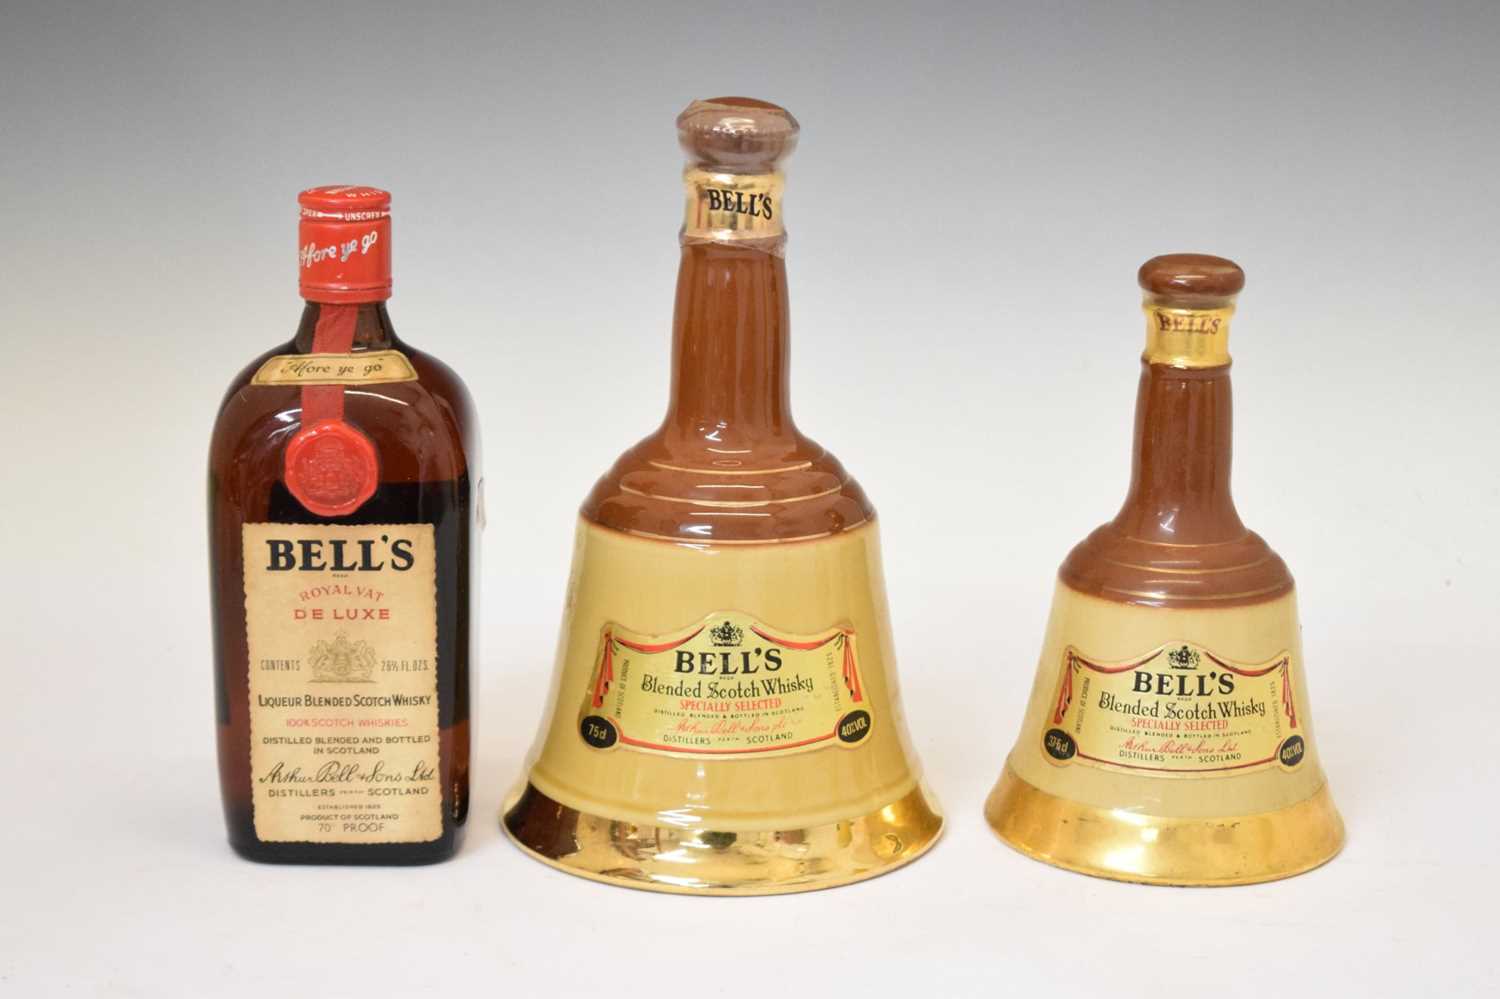 Bells Royal VAT De Luxe whisky, and Bells Whisky - Image 2 of 5